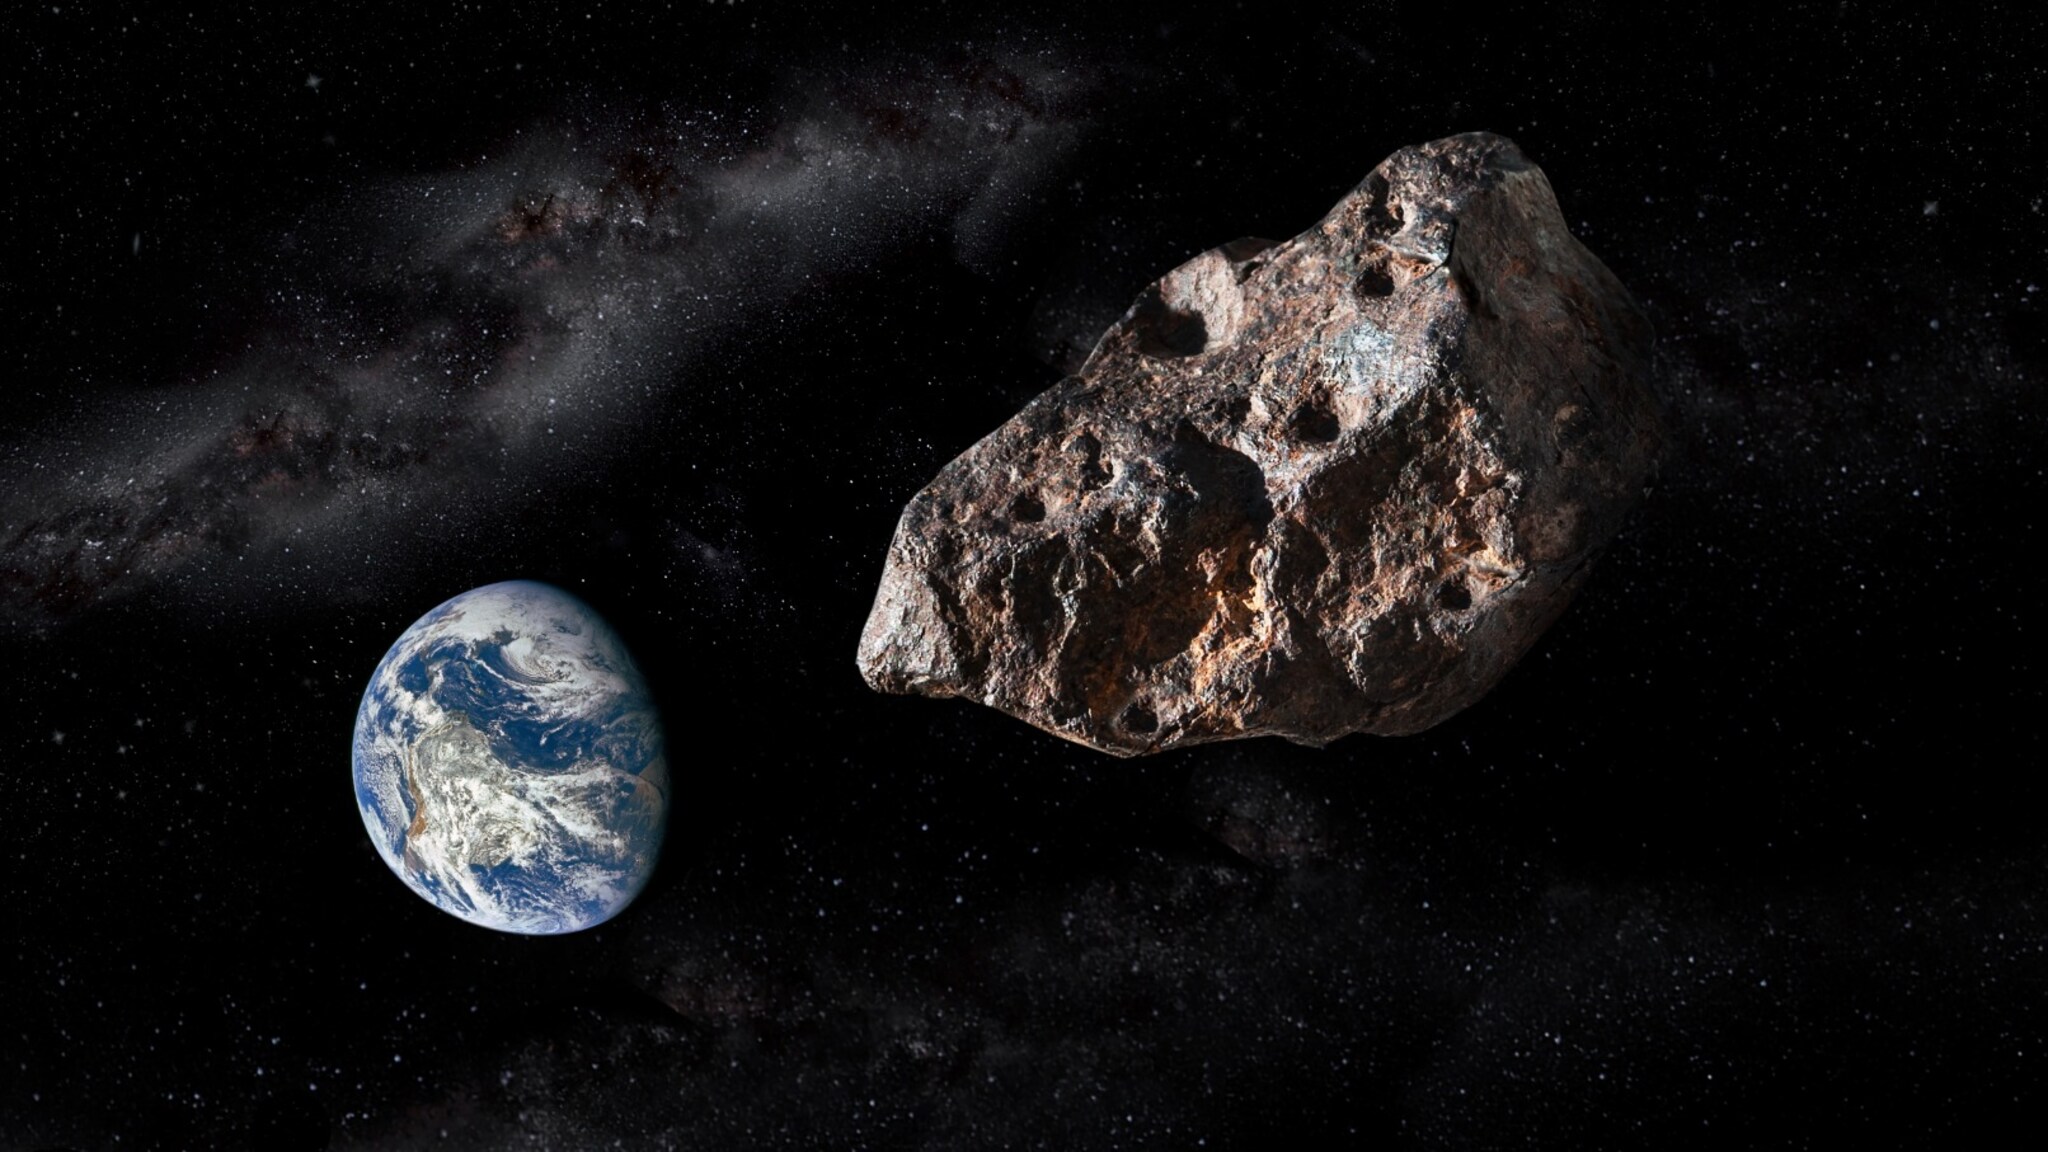 A large asteroid discovered that it ‘could hit Earth one day’